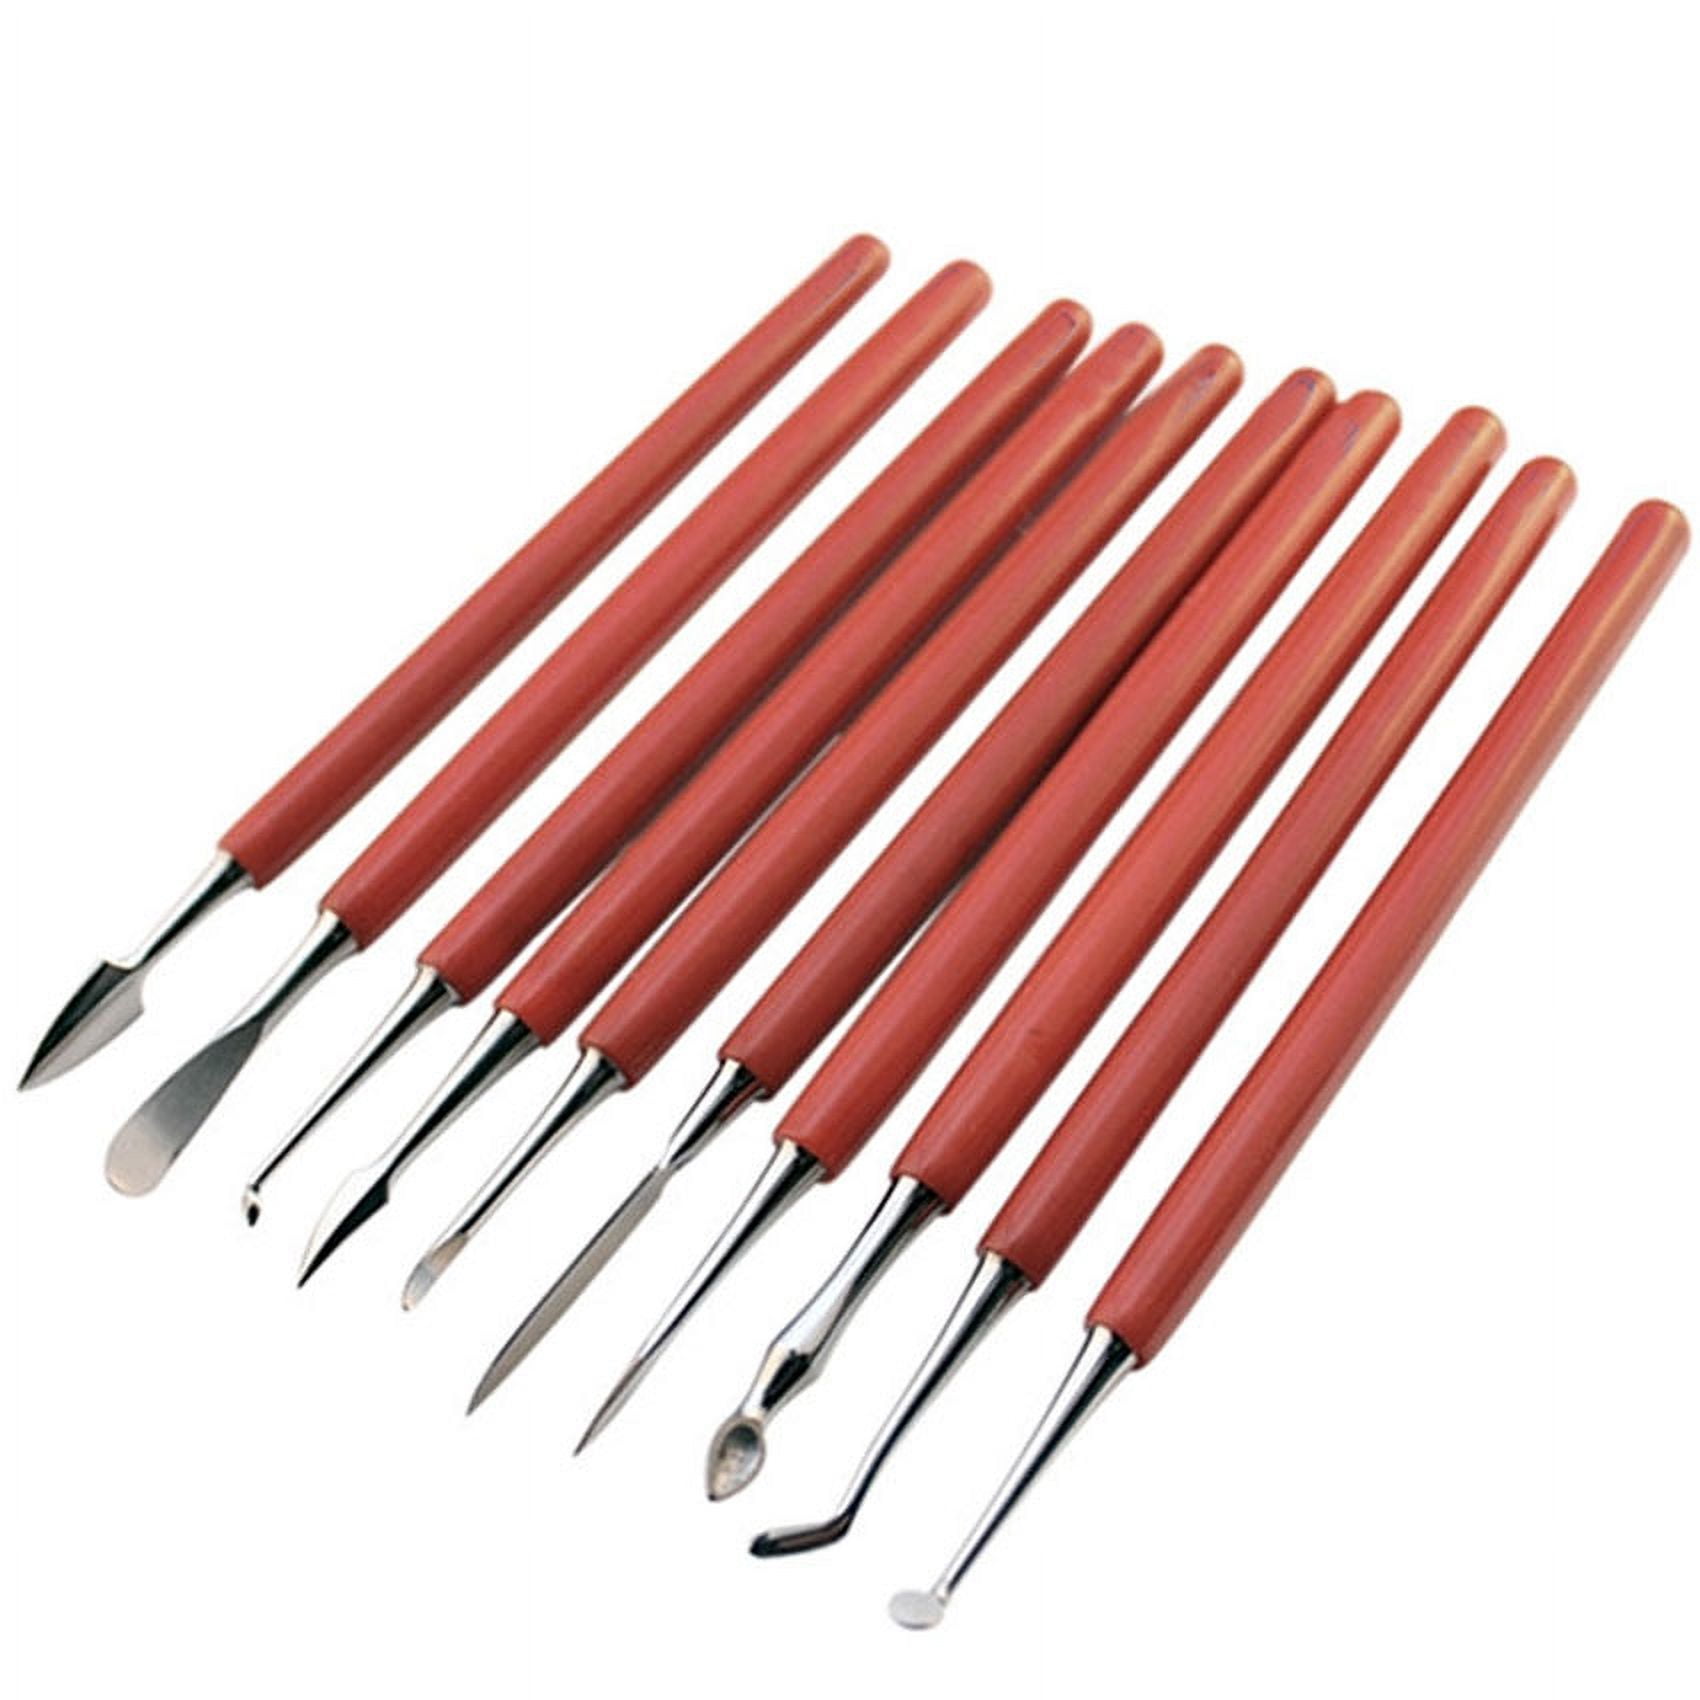 Wax Carving Set of 10 Carvers Tools Jewelry Model Making Candles